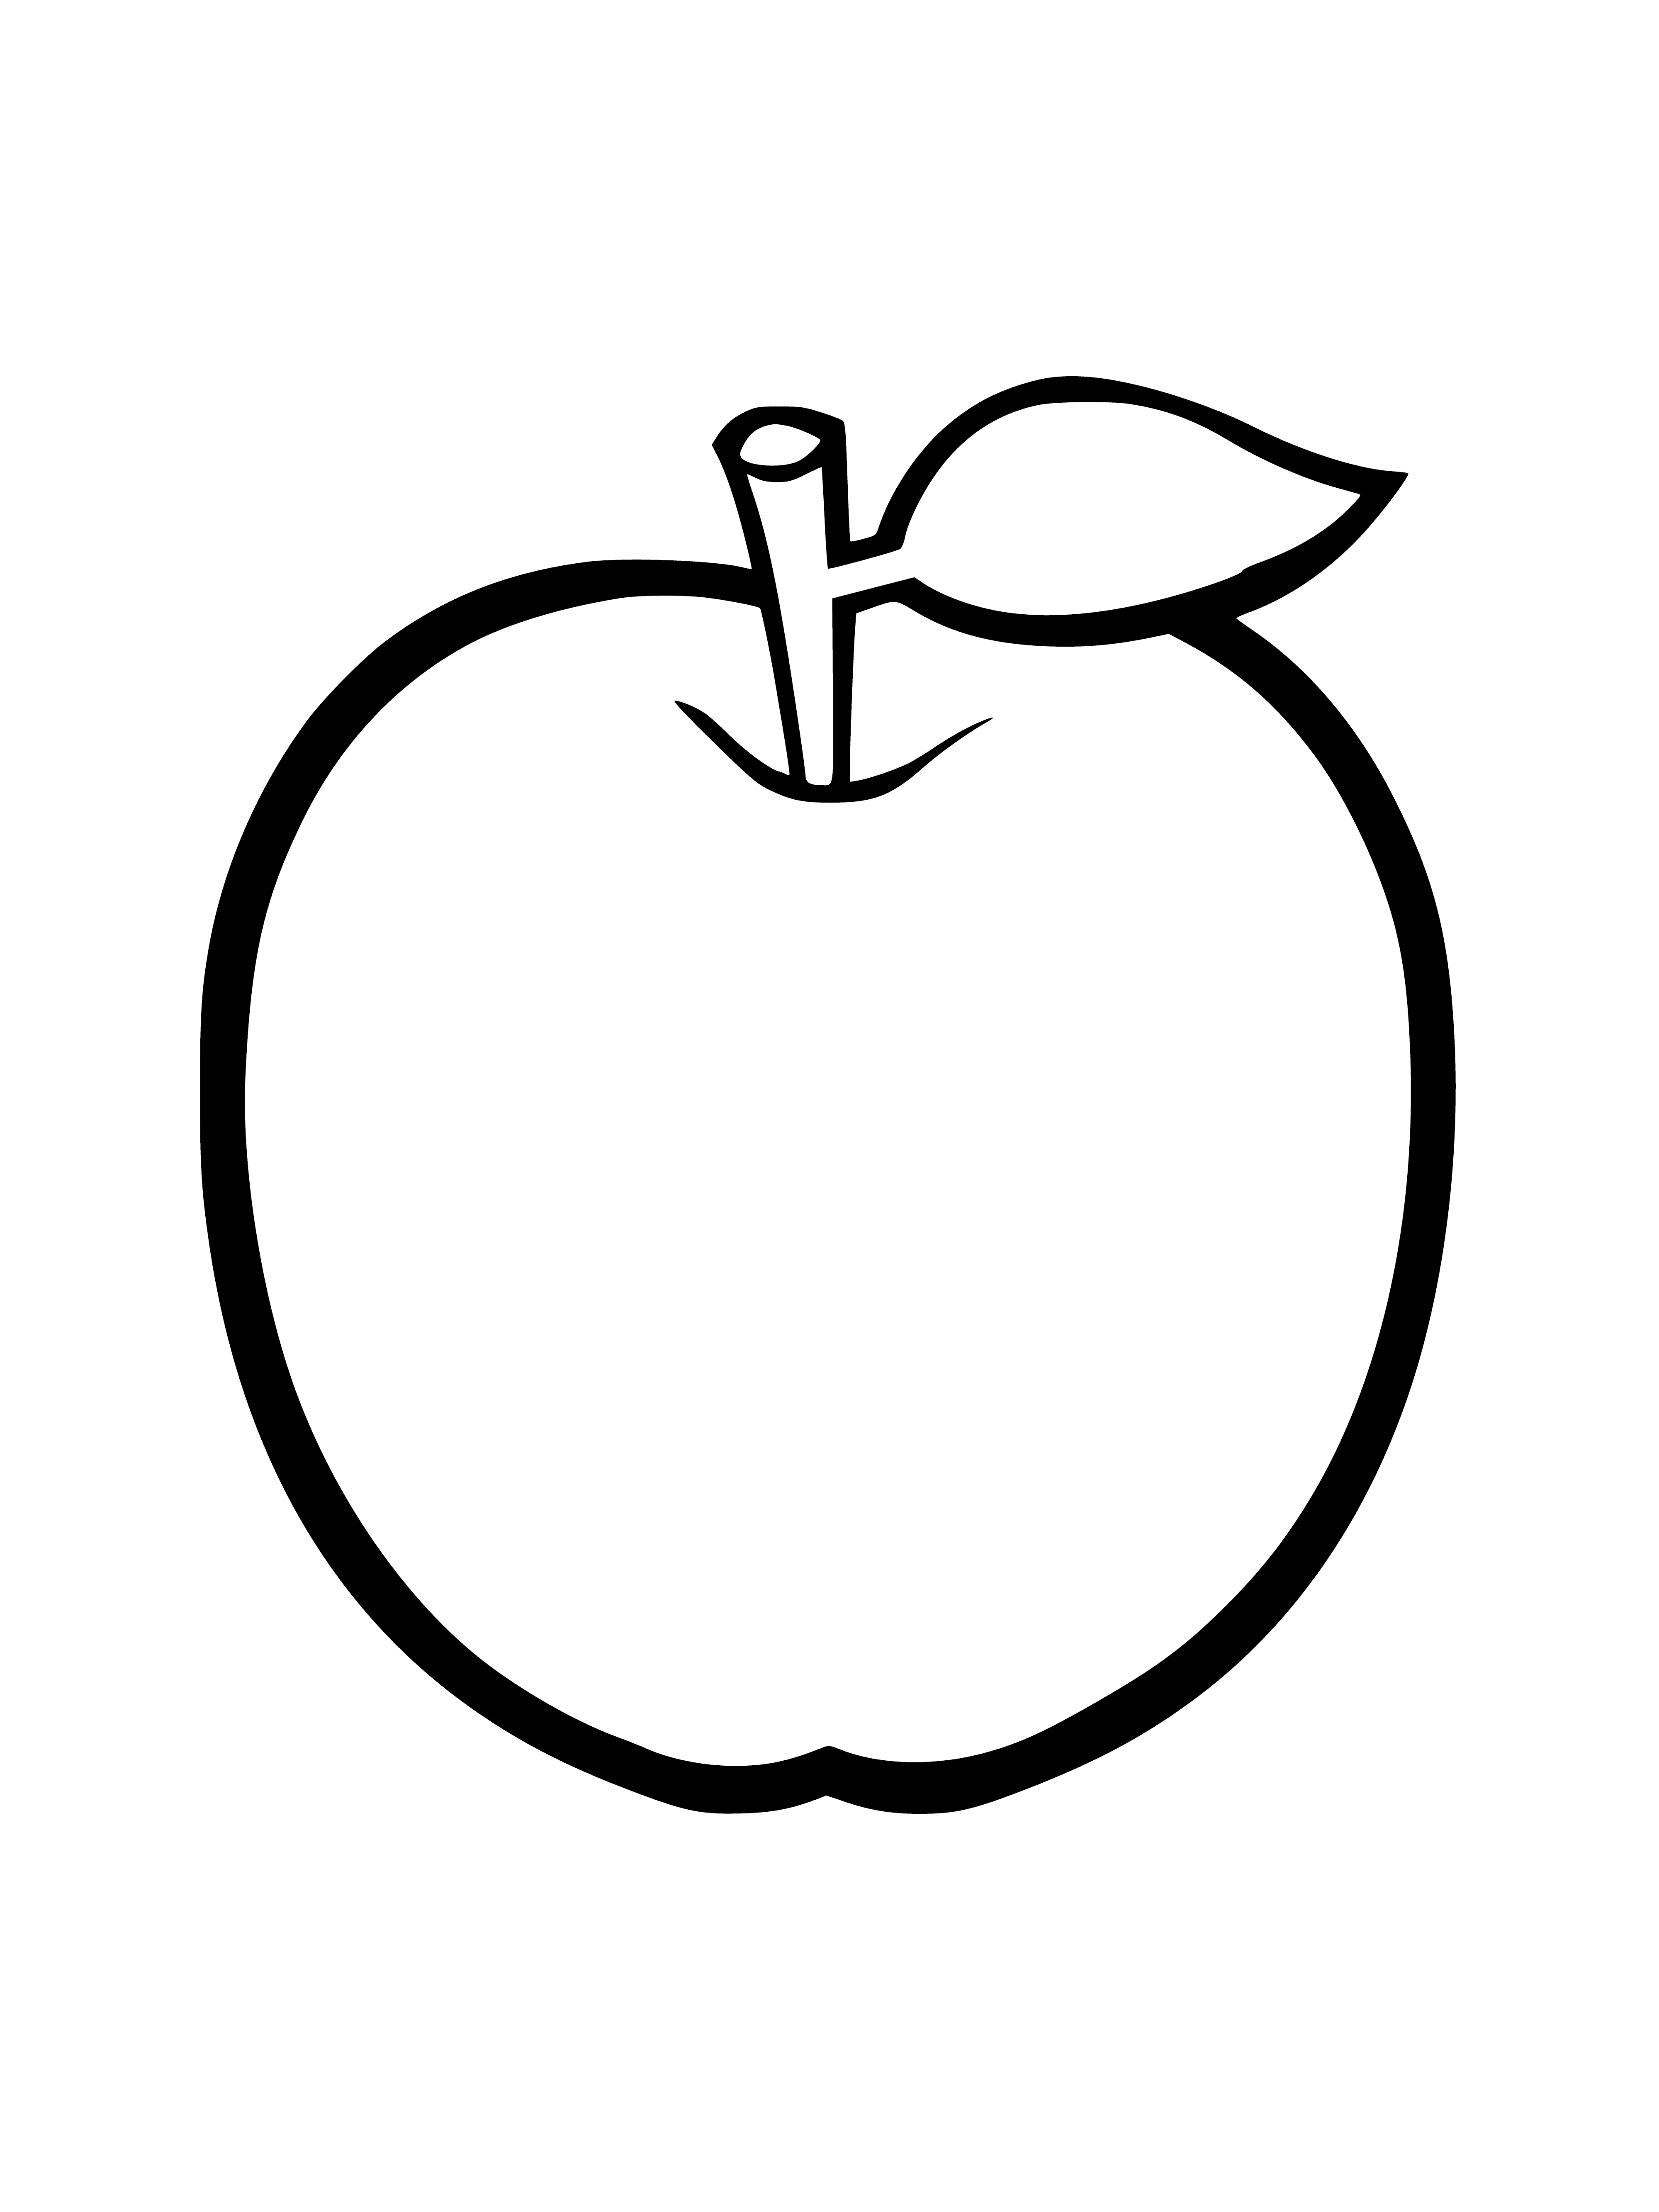 coloring page: Image of an apple cut in half w/ red skin, yellow flesh, brown stem & green leaf. It's juicy & perfect for a snack! #FruitLovers